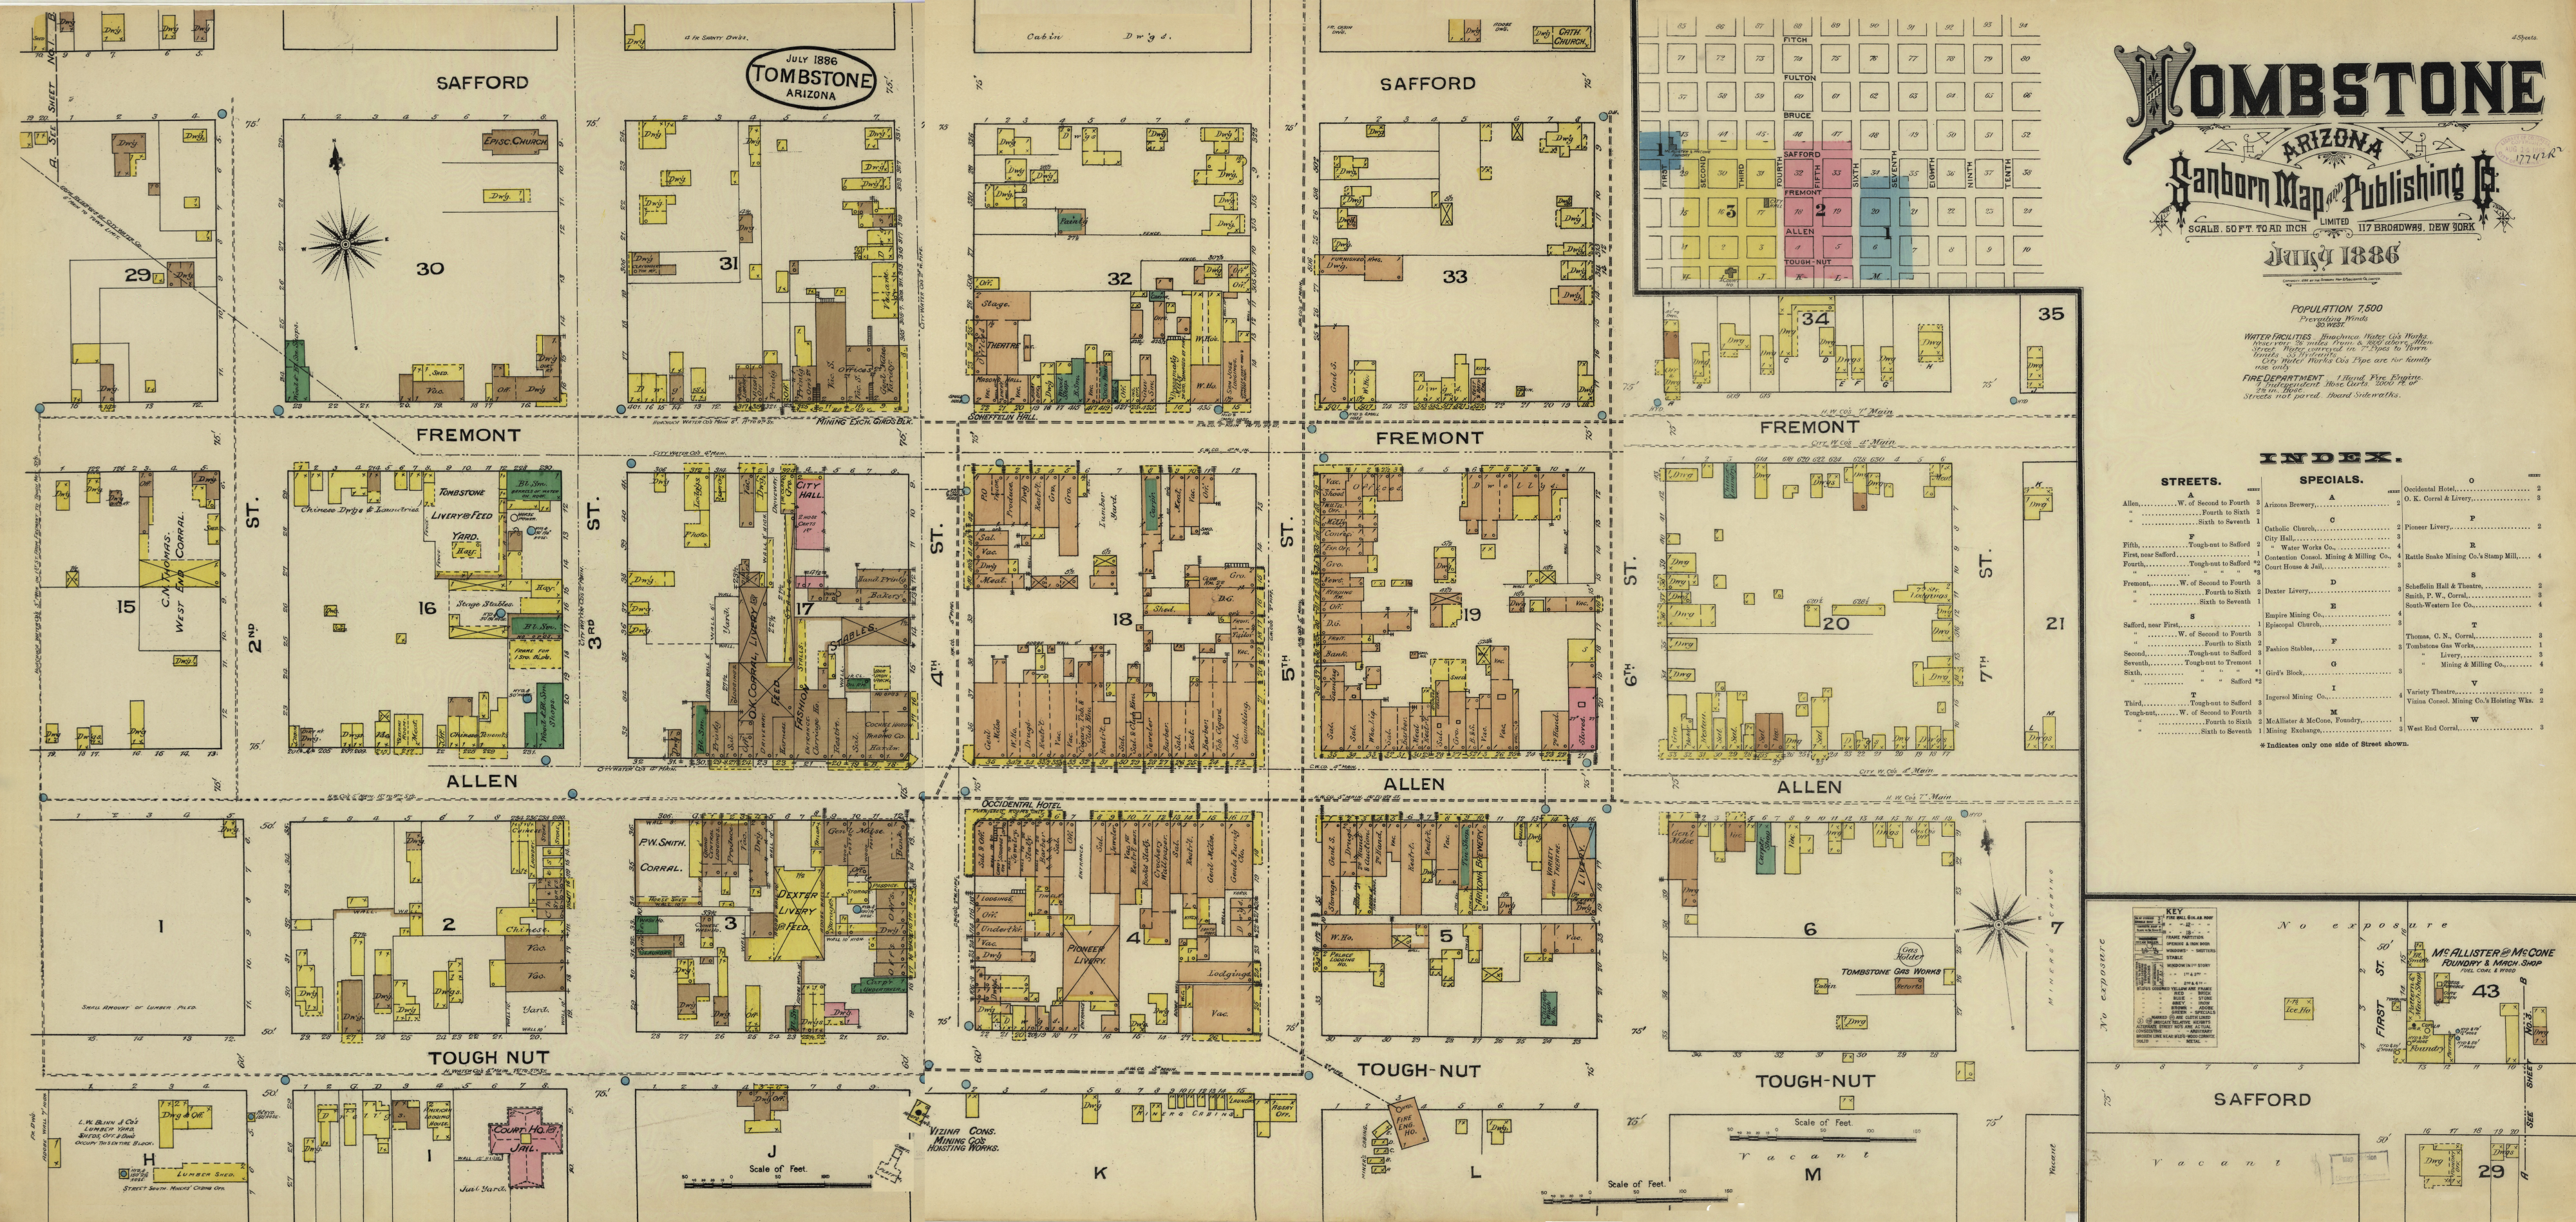 Tombstone fire insurance map 1886 02.png